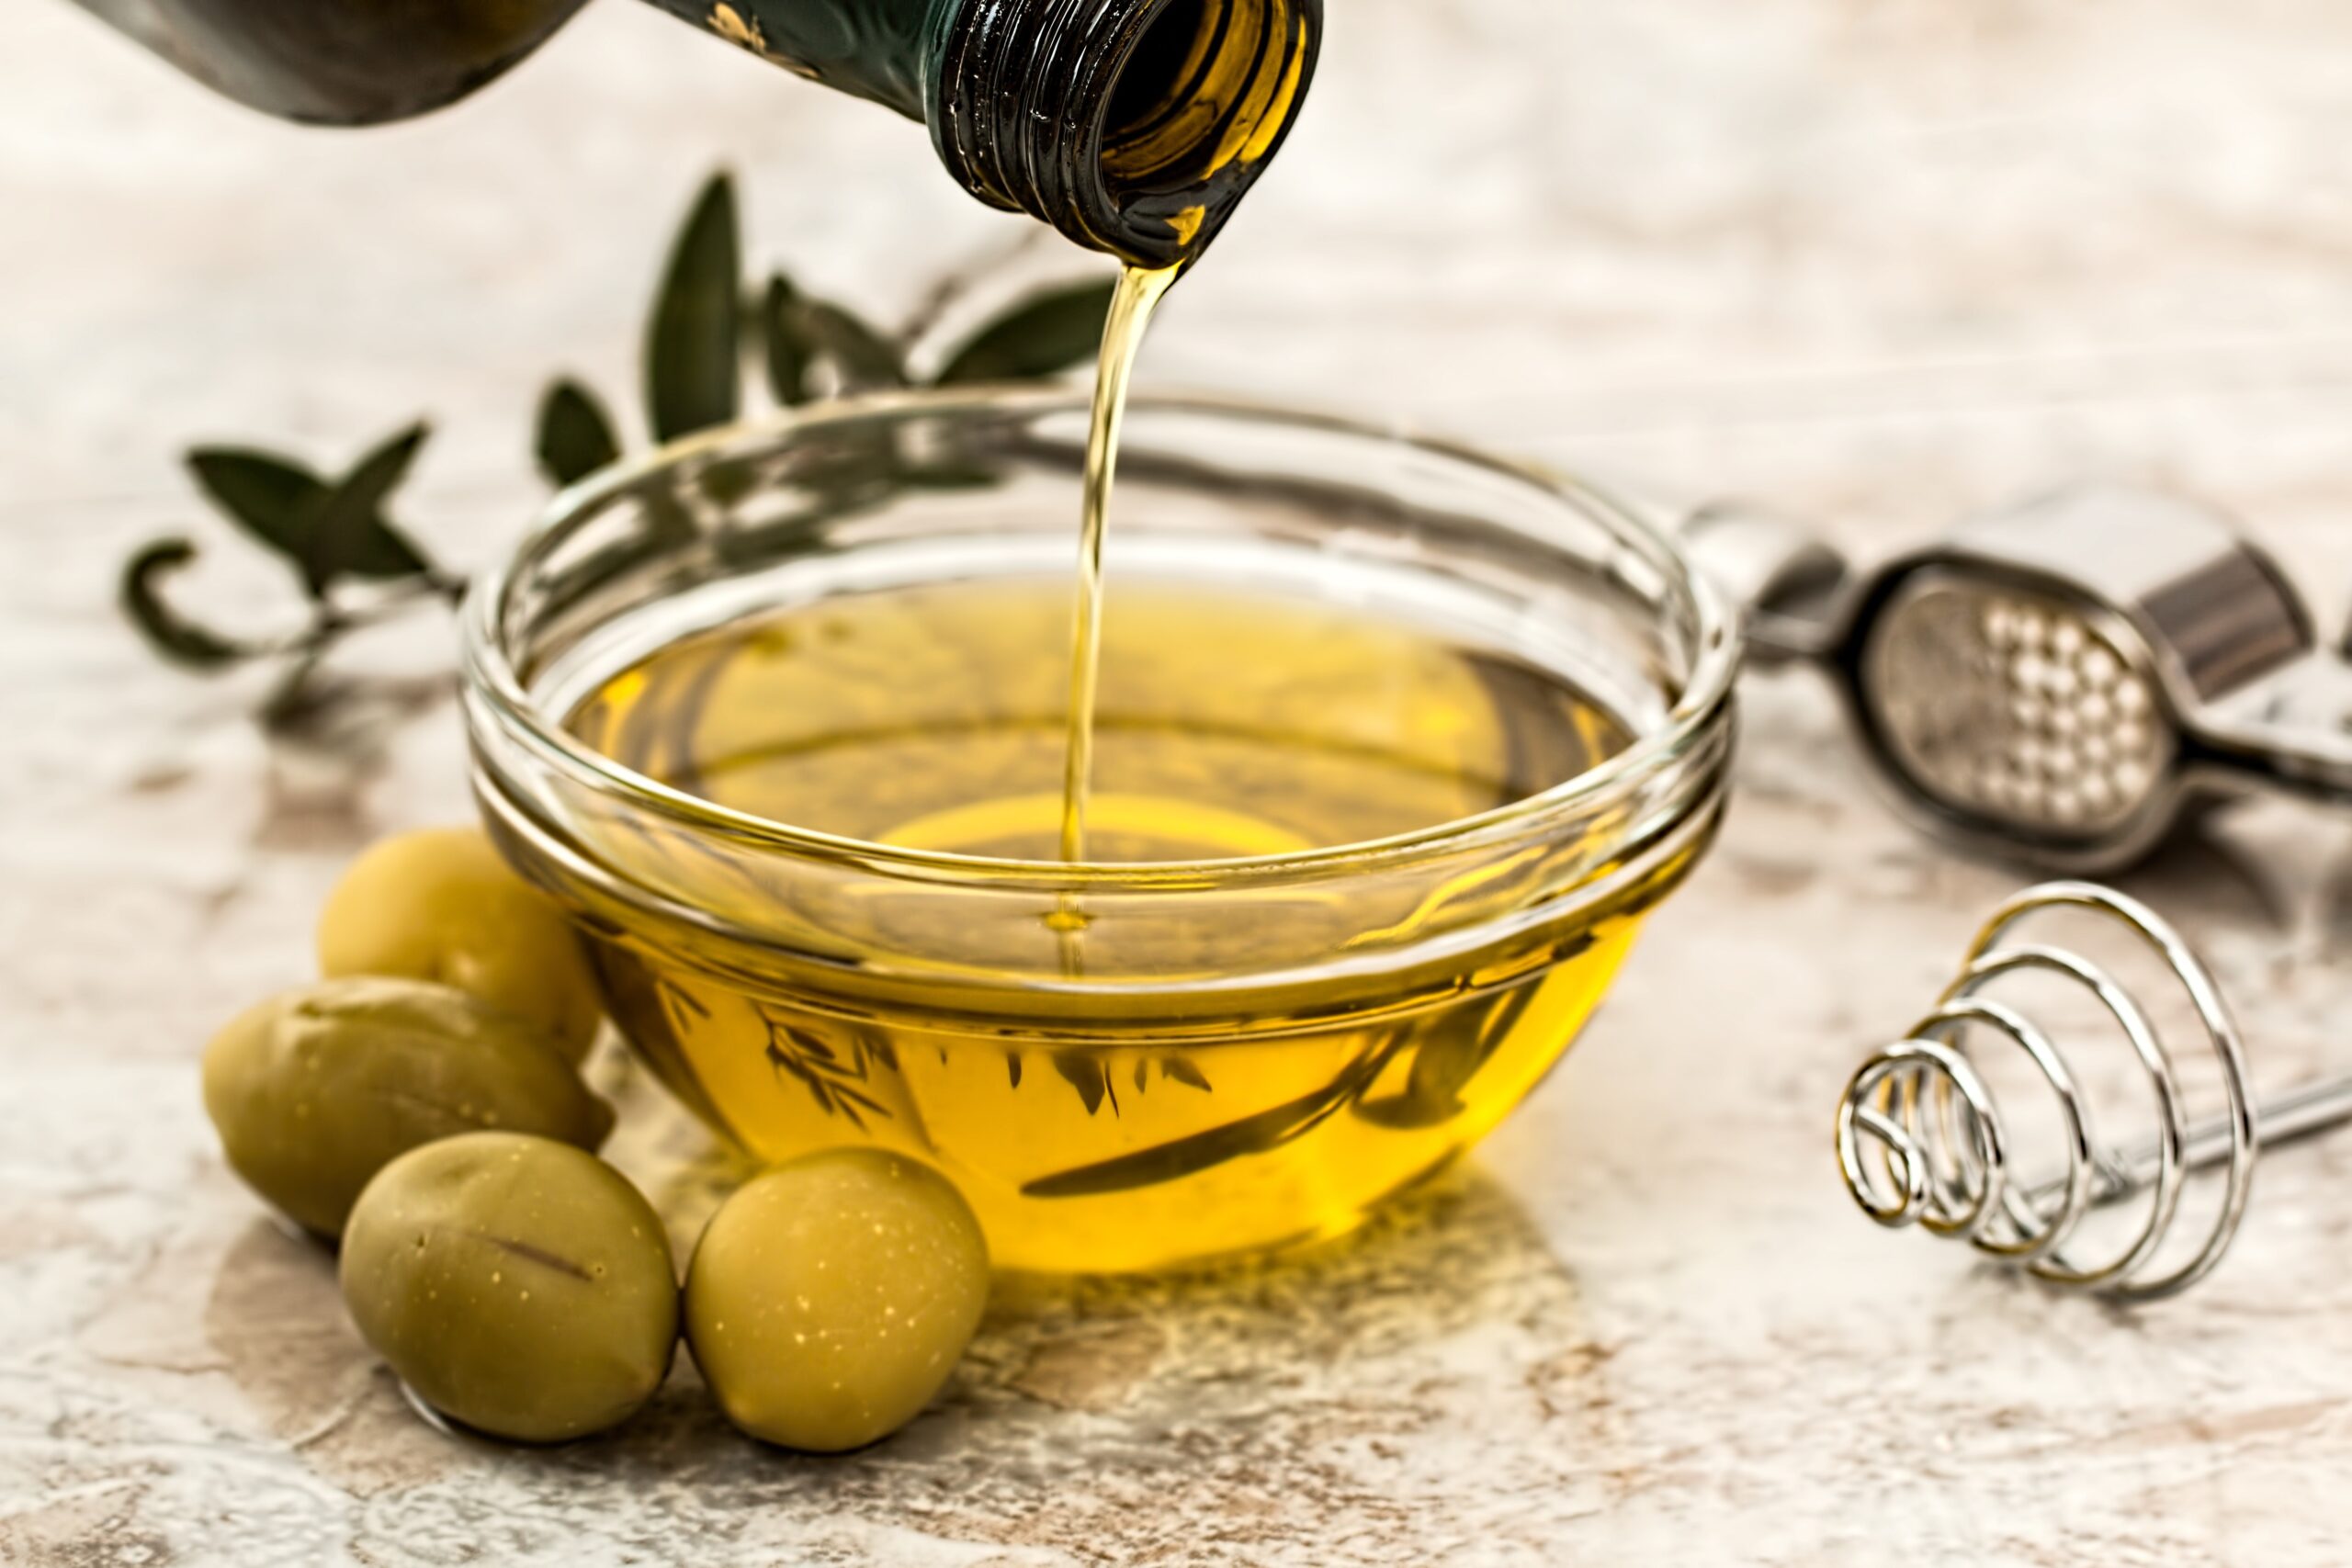 Wine and Olive Oil Tasting Experience